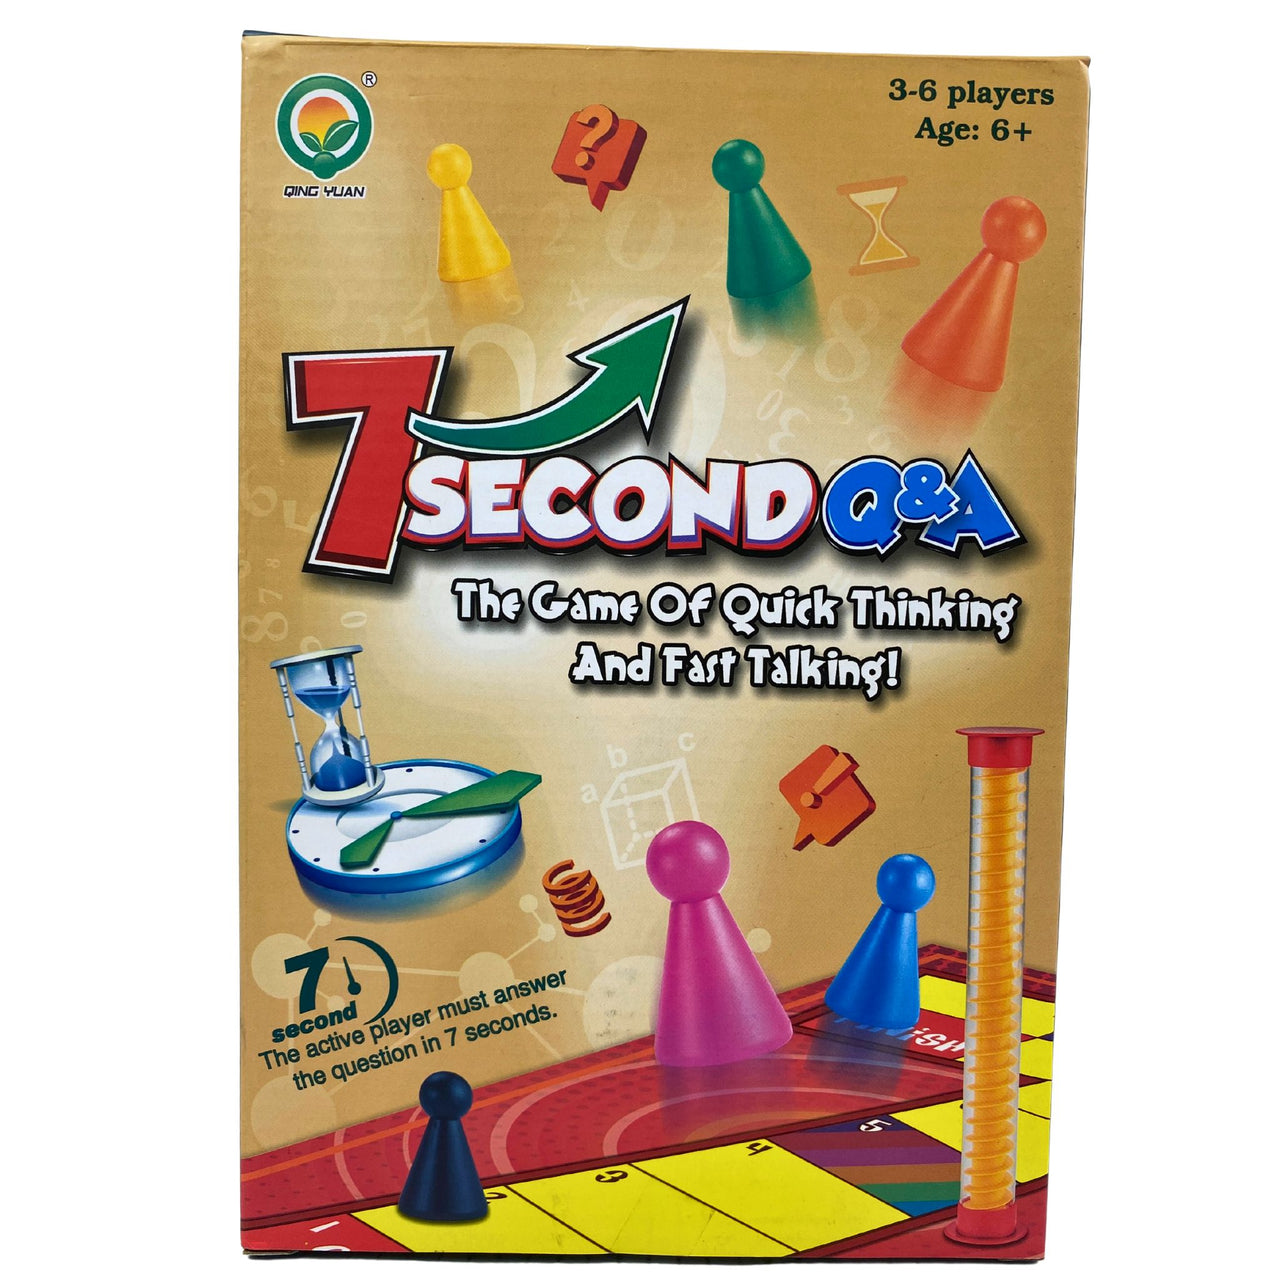 7 Second Q&A The Game of Quick Thinking and Fast Talking 